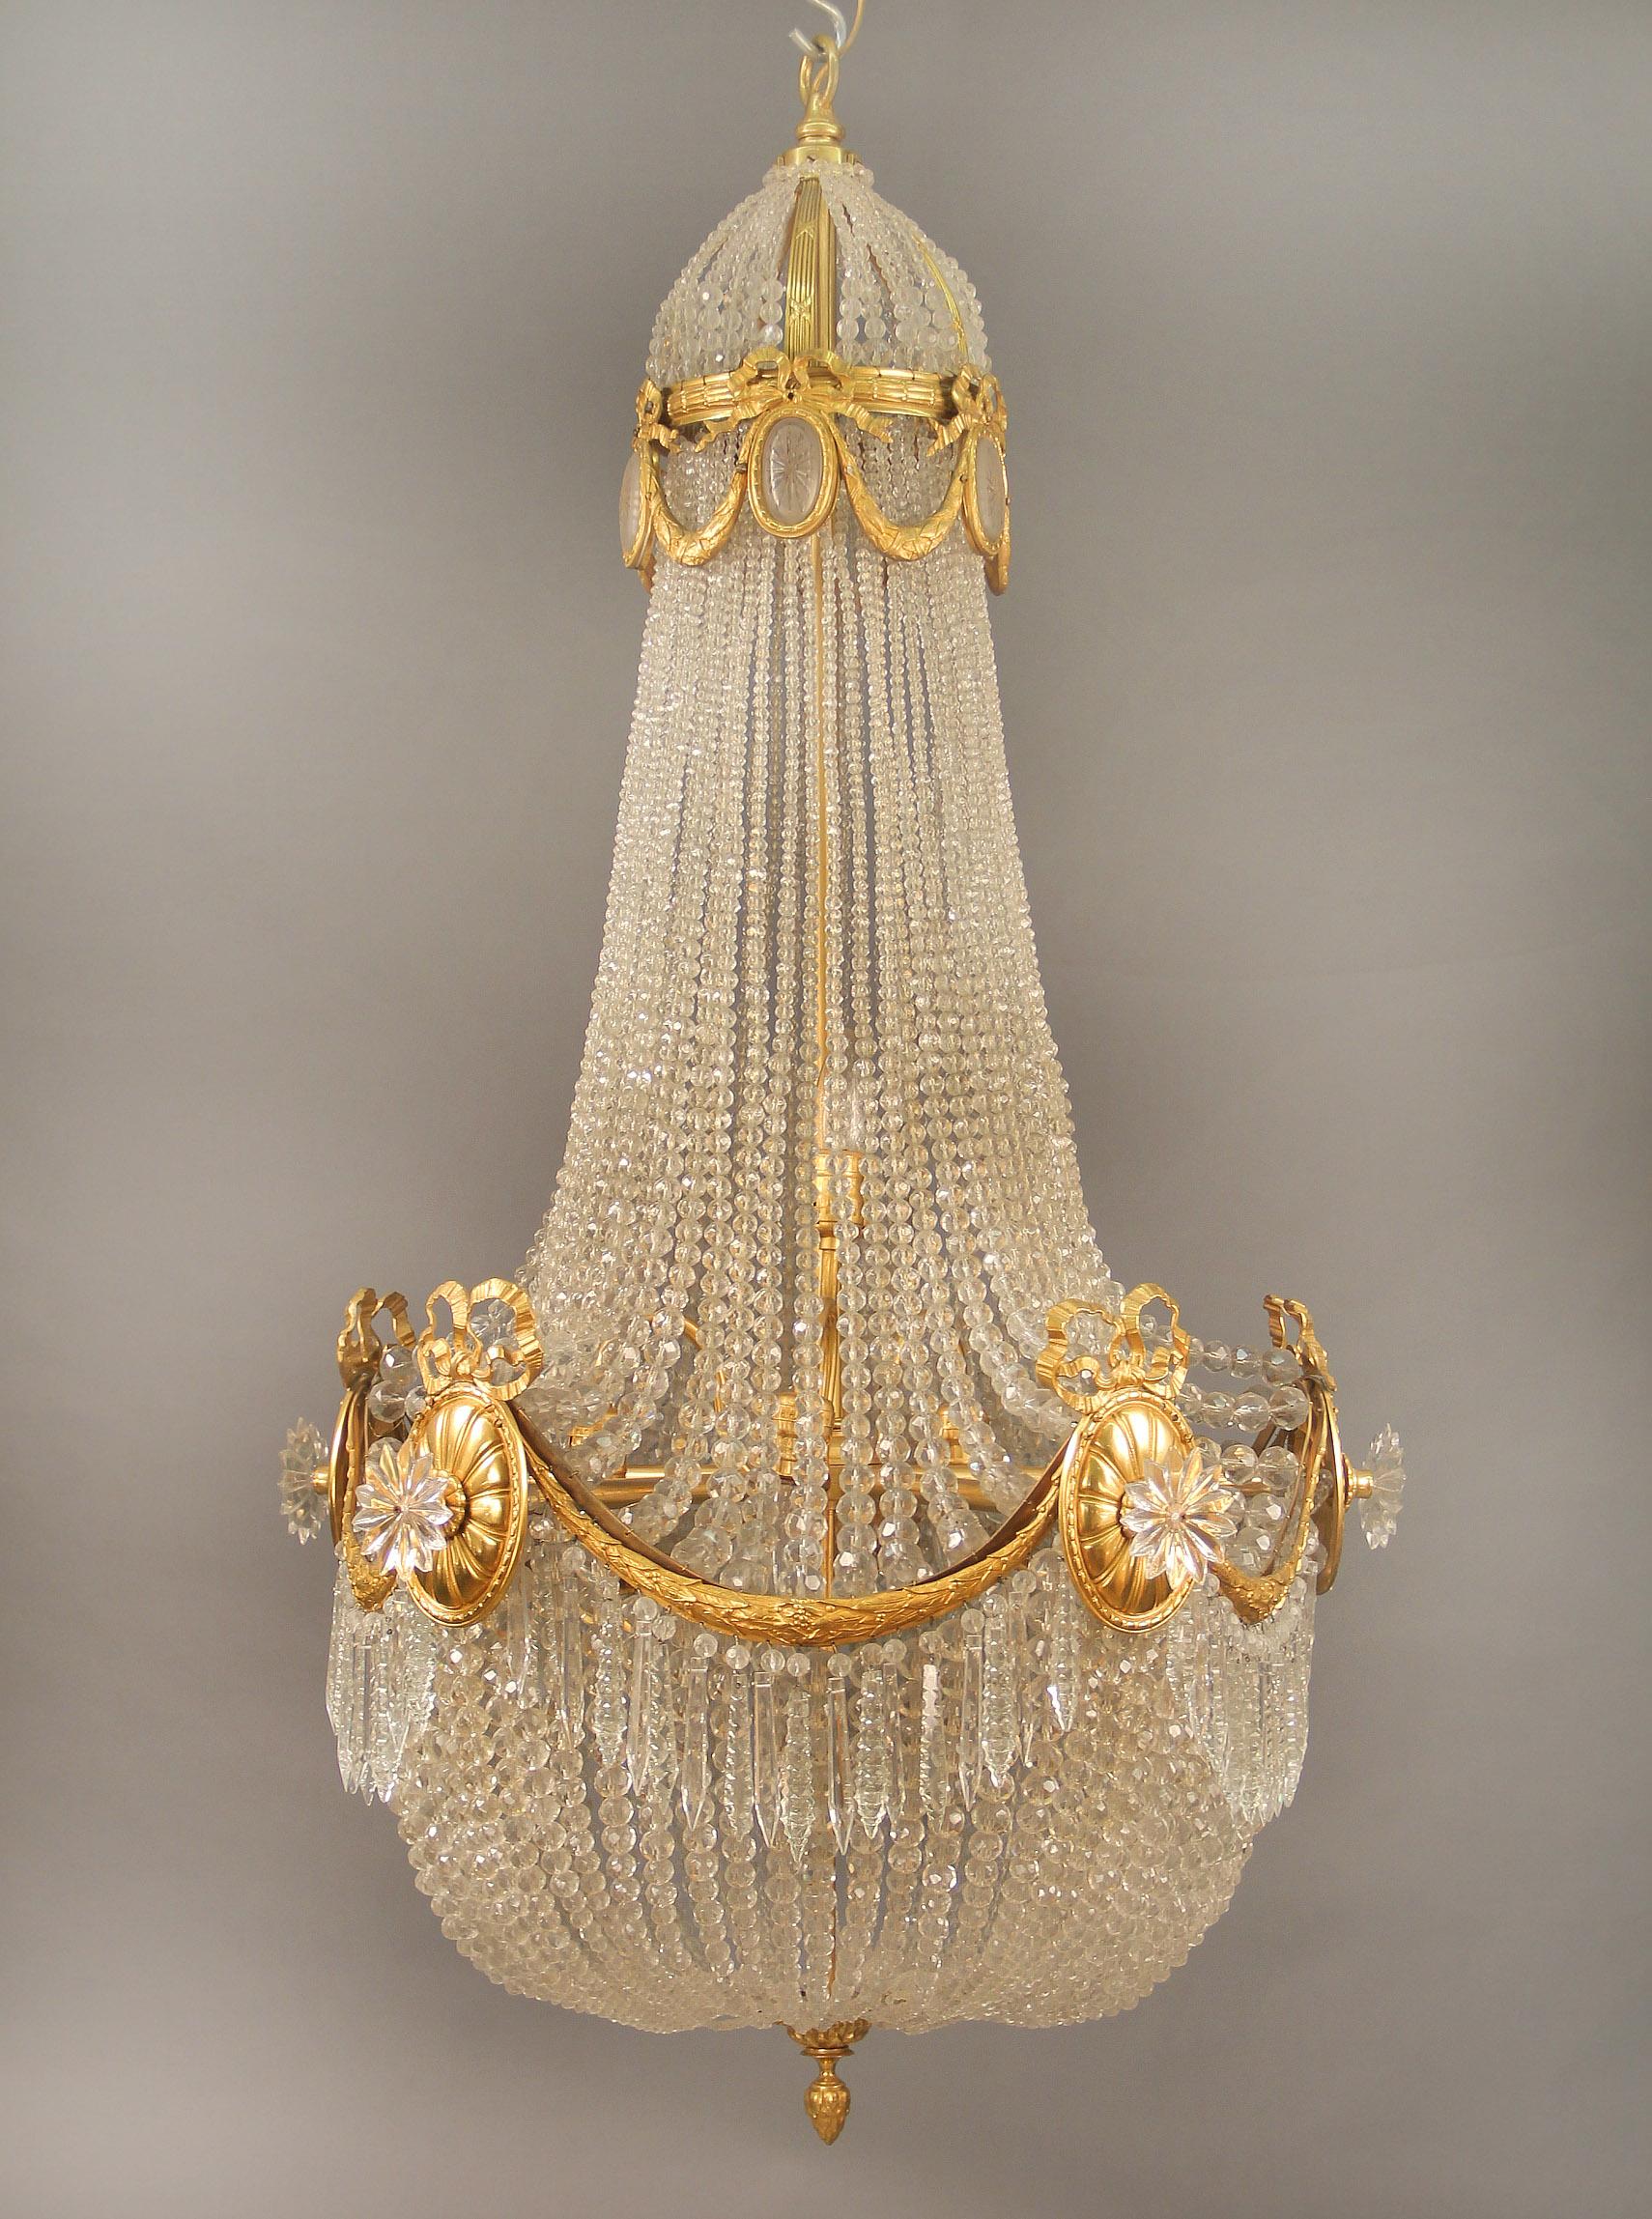 An Excellent Late 19th / Early 20th Century Gilt Bronze Beaded Basket Five Light Chandelier

The fine beaded crown designed with bronze swags and bows centered with etched frosted crystal medallions, the flowing beads connected to bronze wreaths